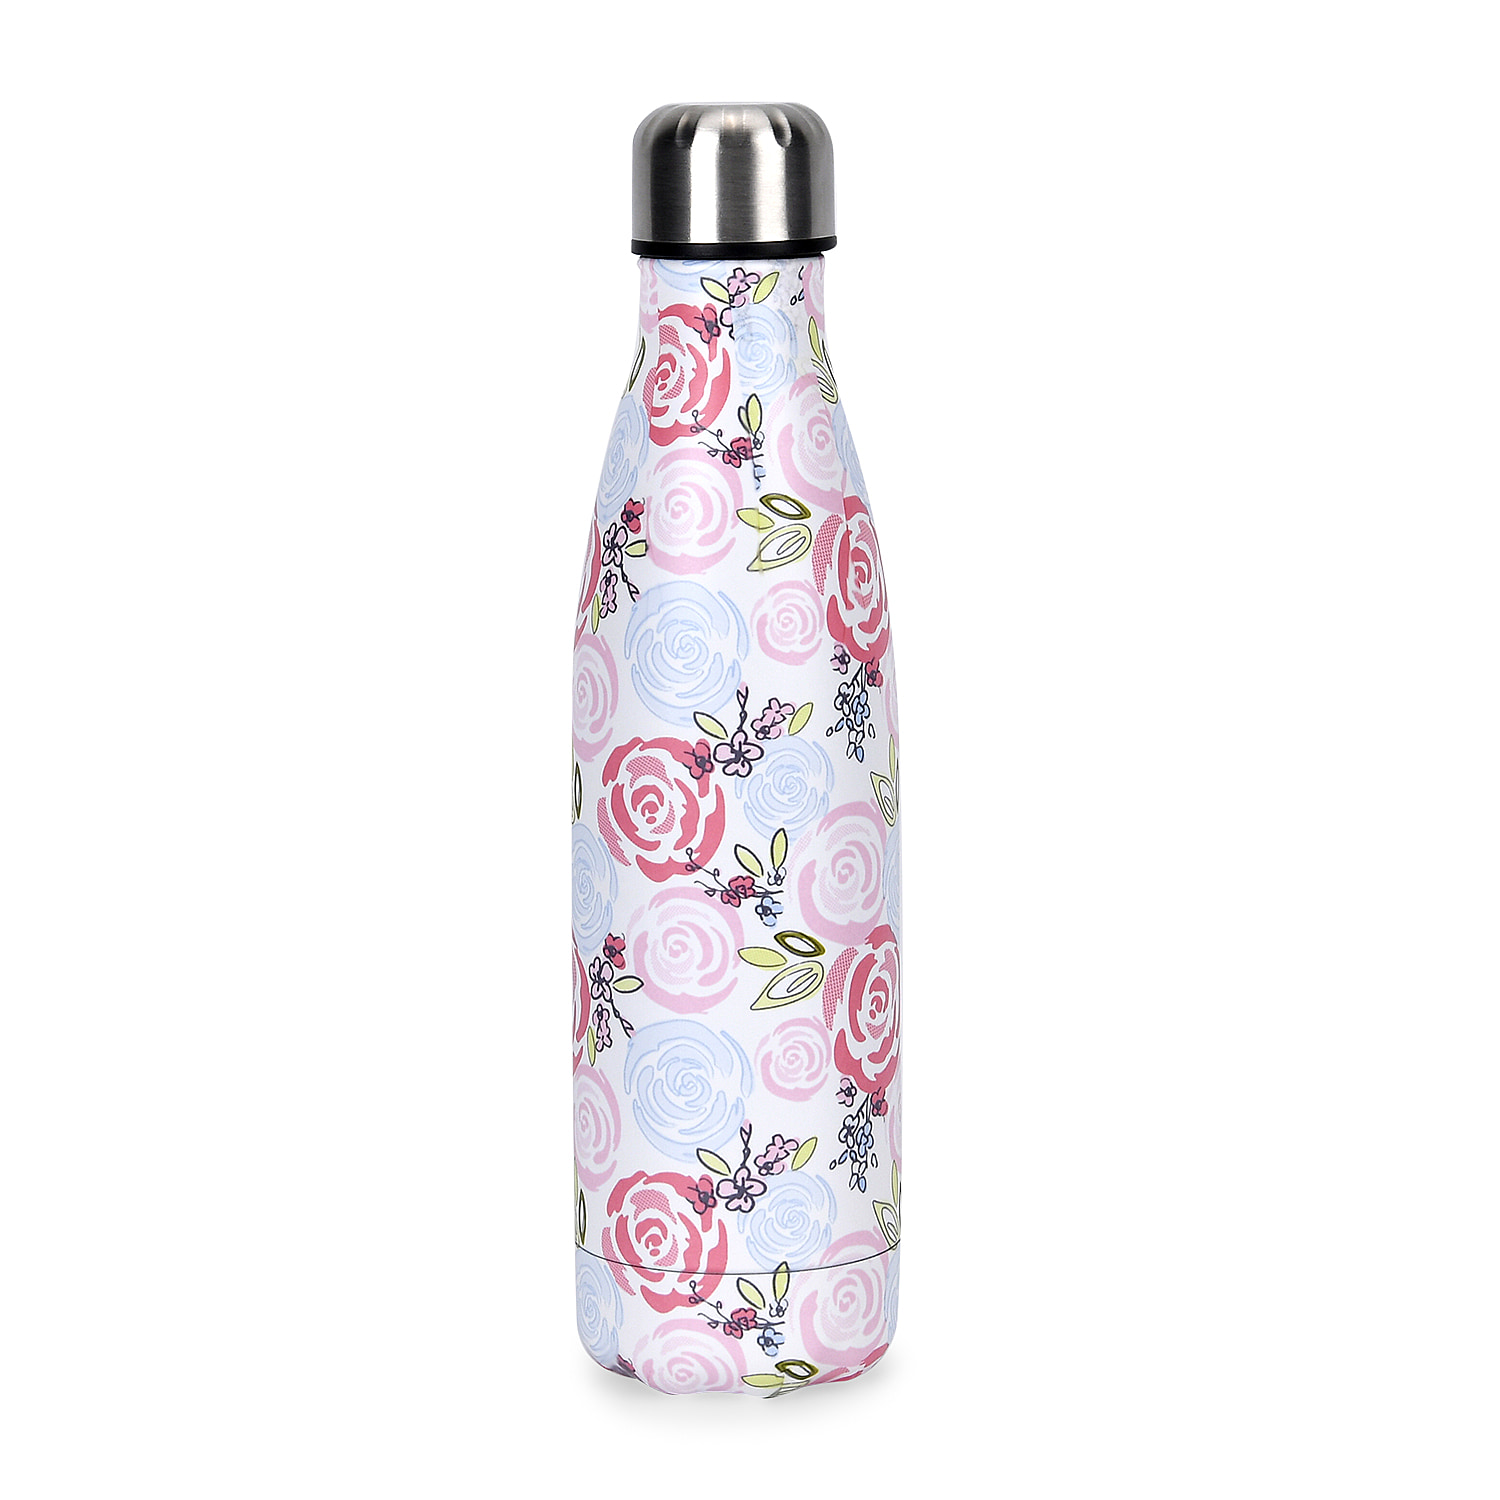 Stainless Steel Drinking Water Bottle for School, Sports, Running, Gym 500m - PINK